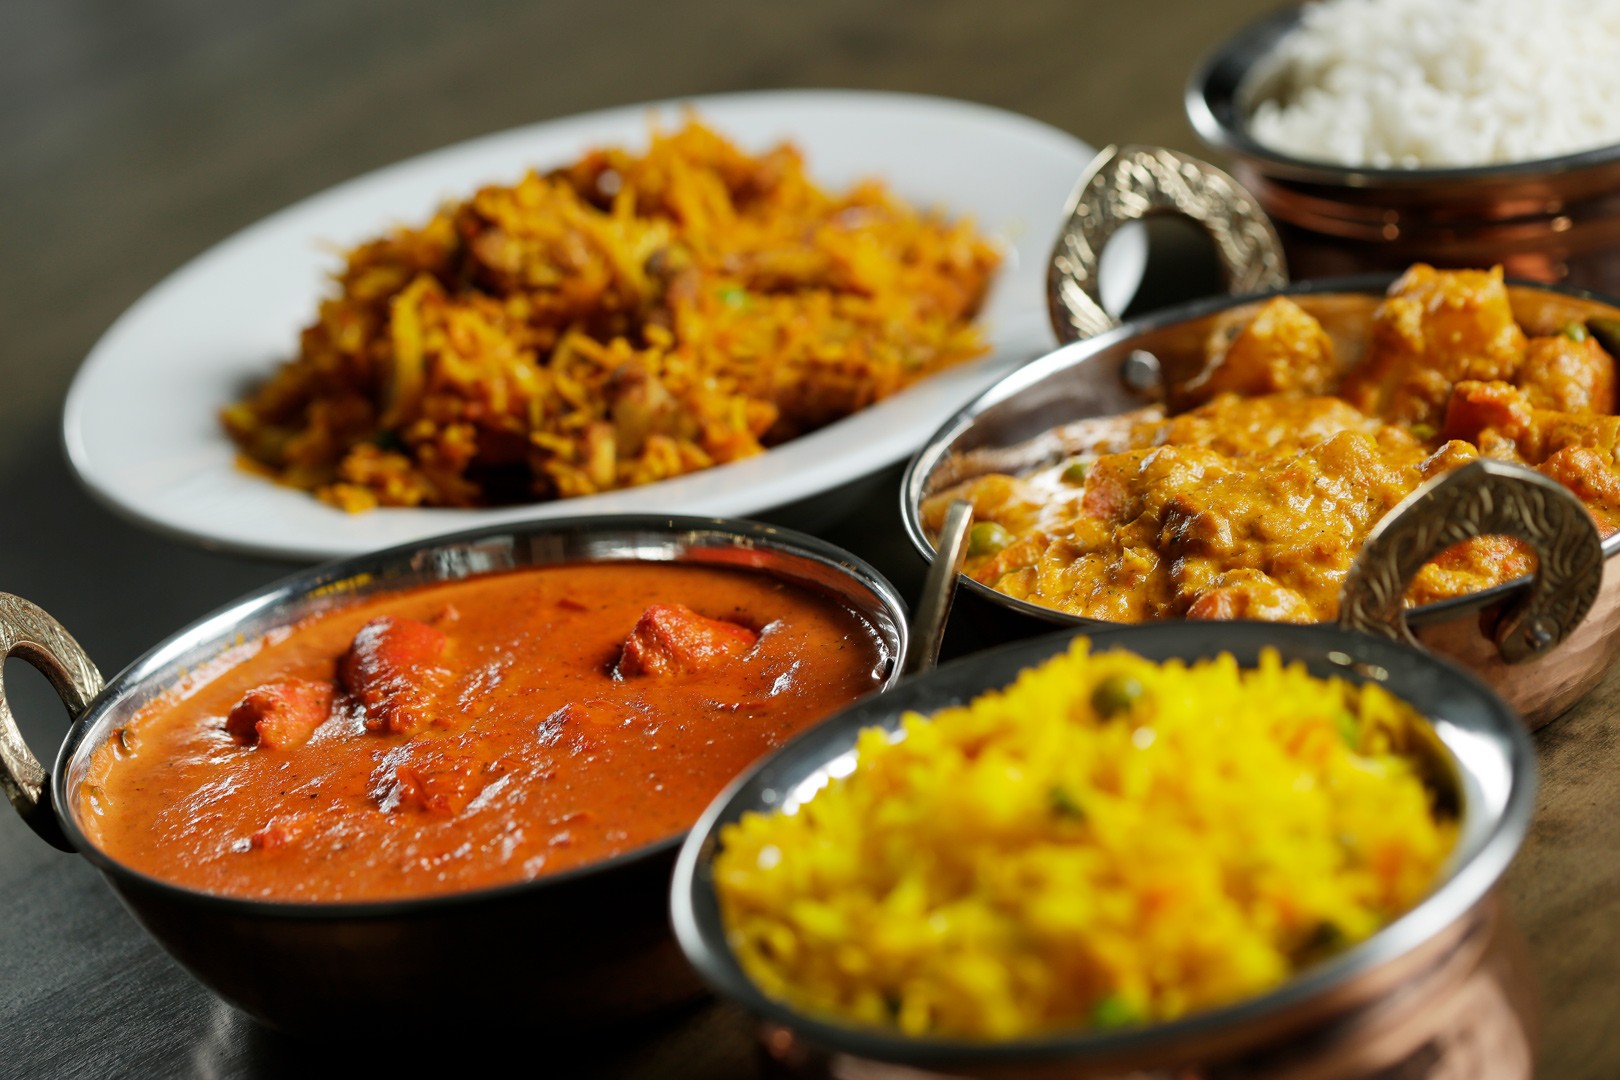 Tracing the origins of curry across continents, cultures and history ...